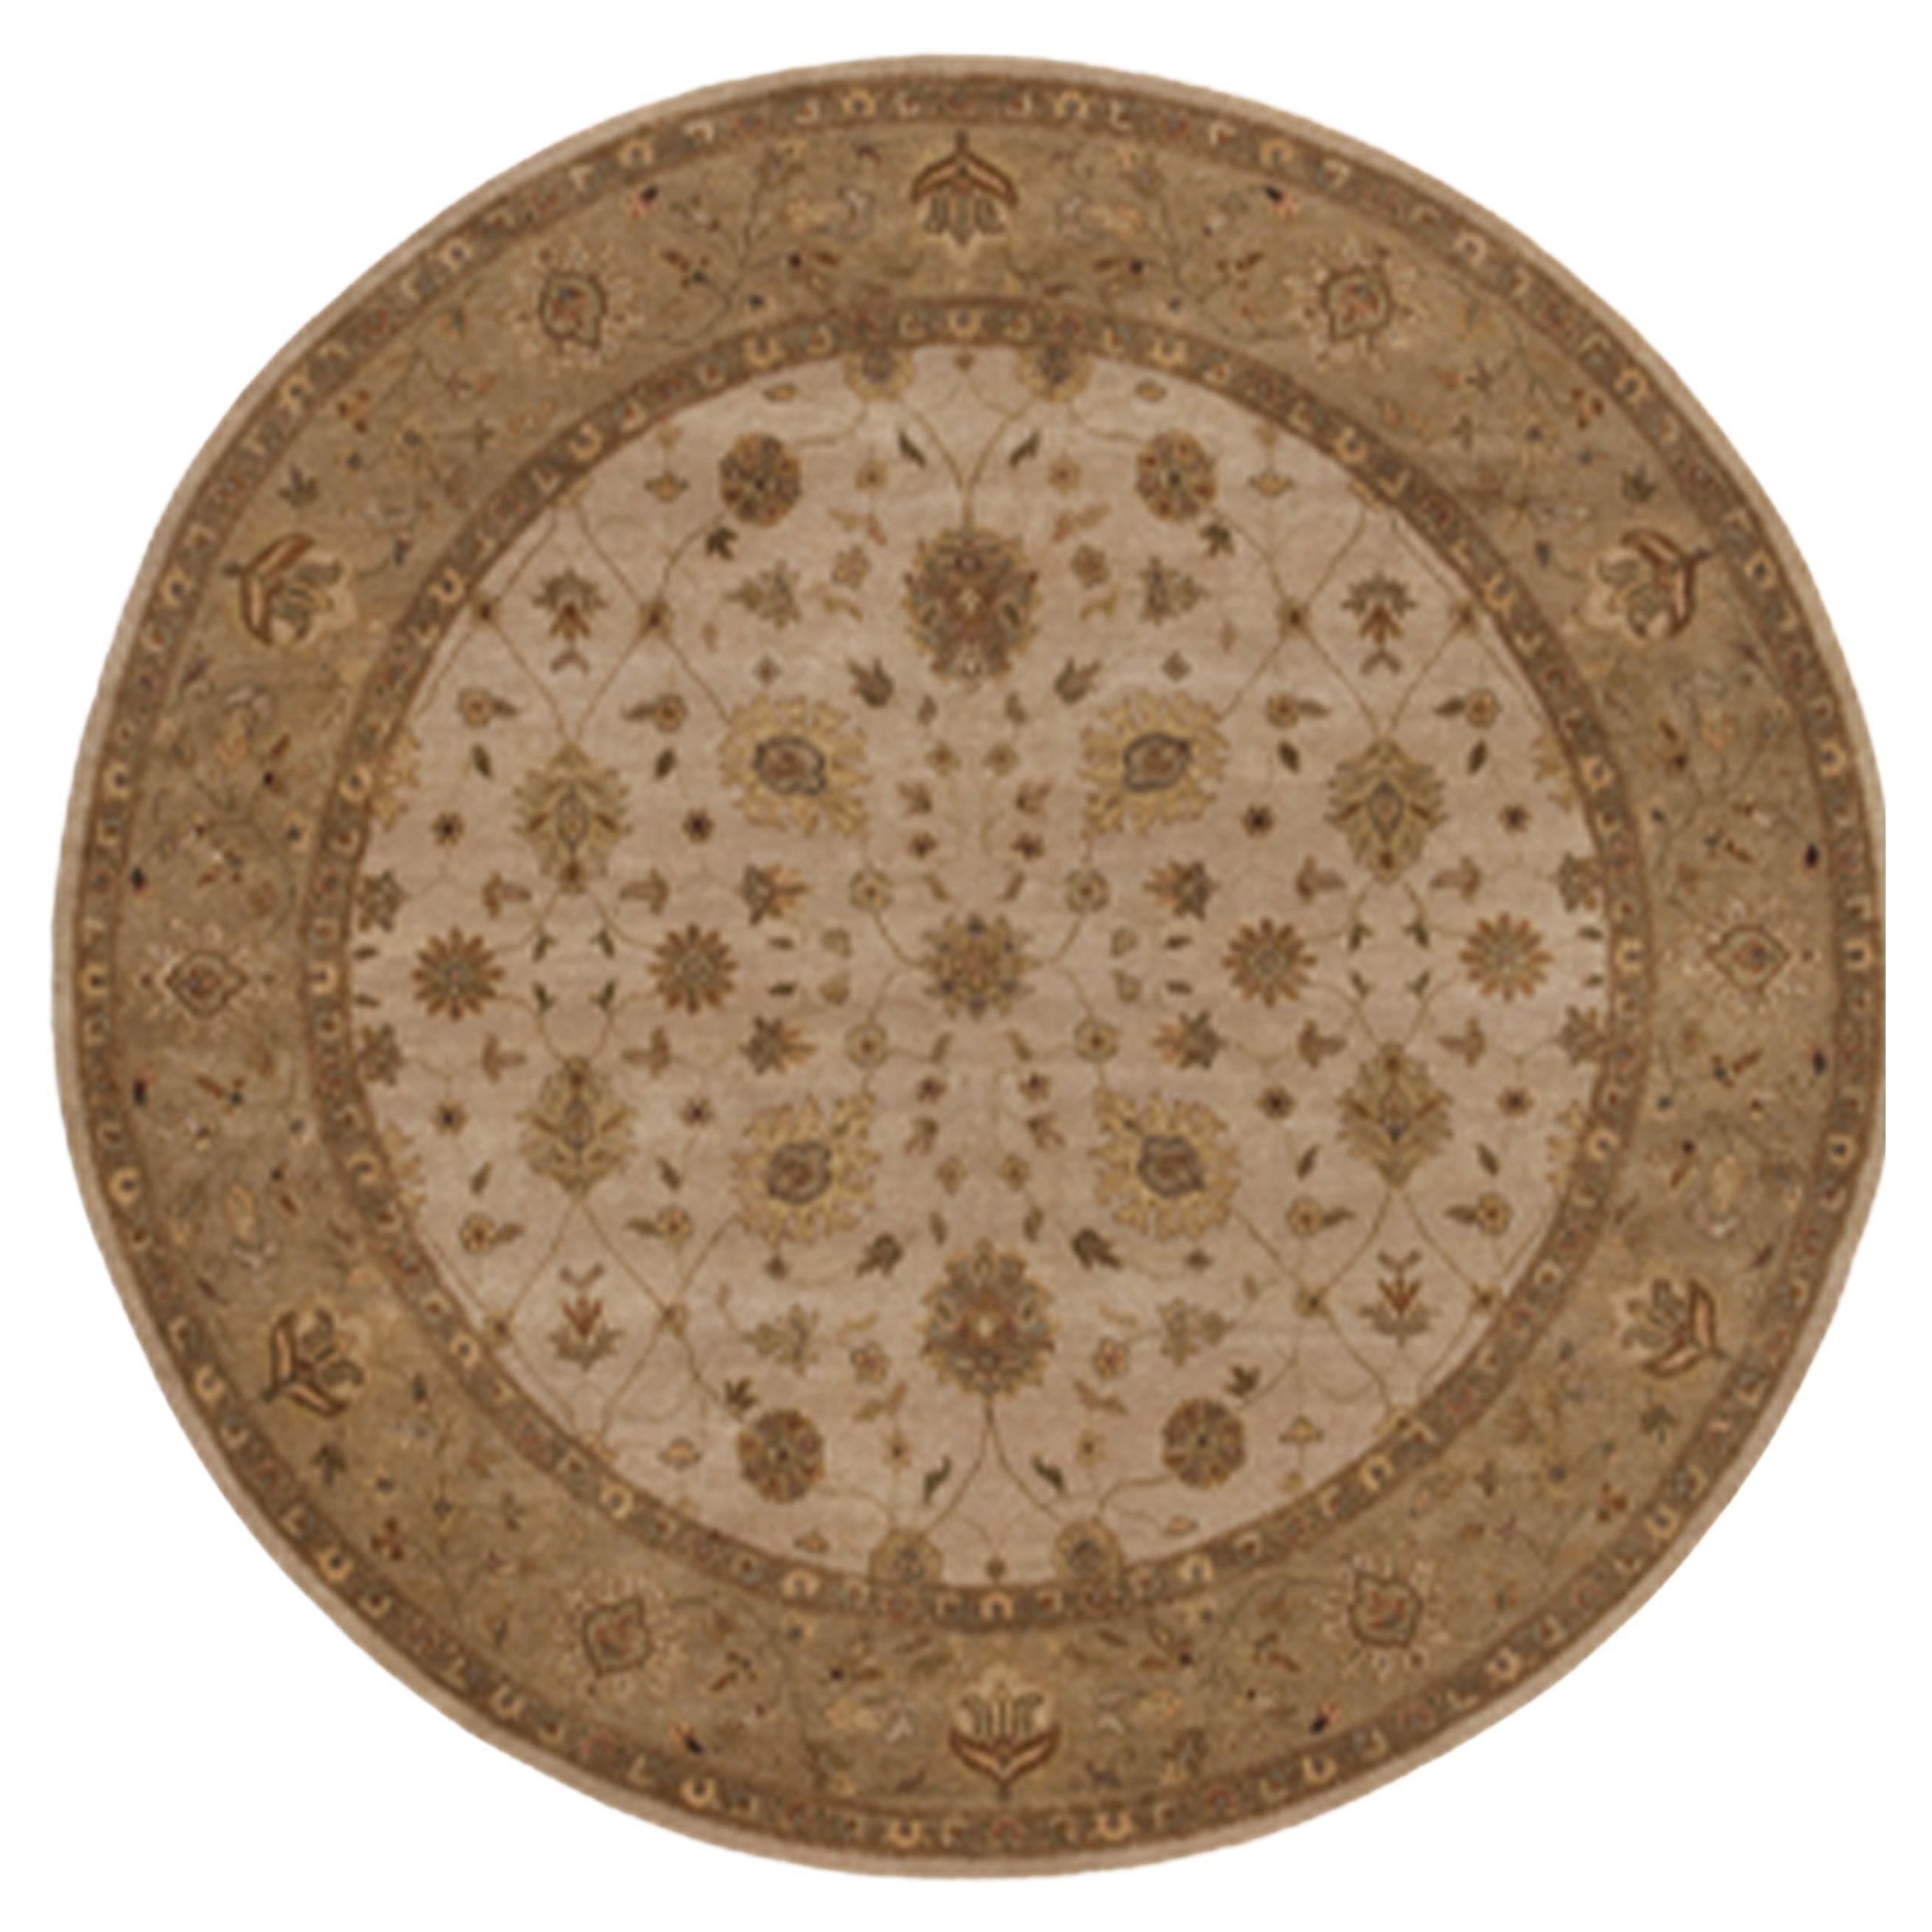 Luxury Traditional Hand-Knotted Amritsar Sultanabad Ivory/Beige 12X12 Round Rug